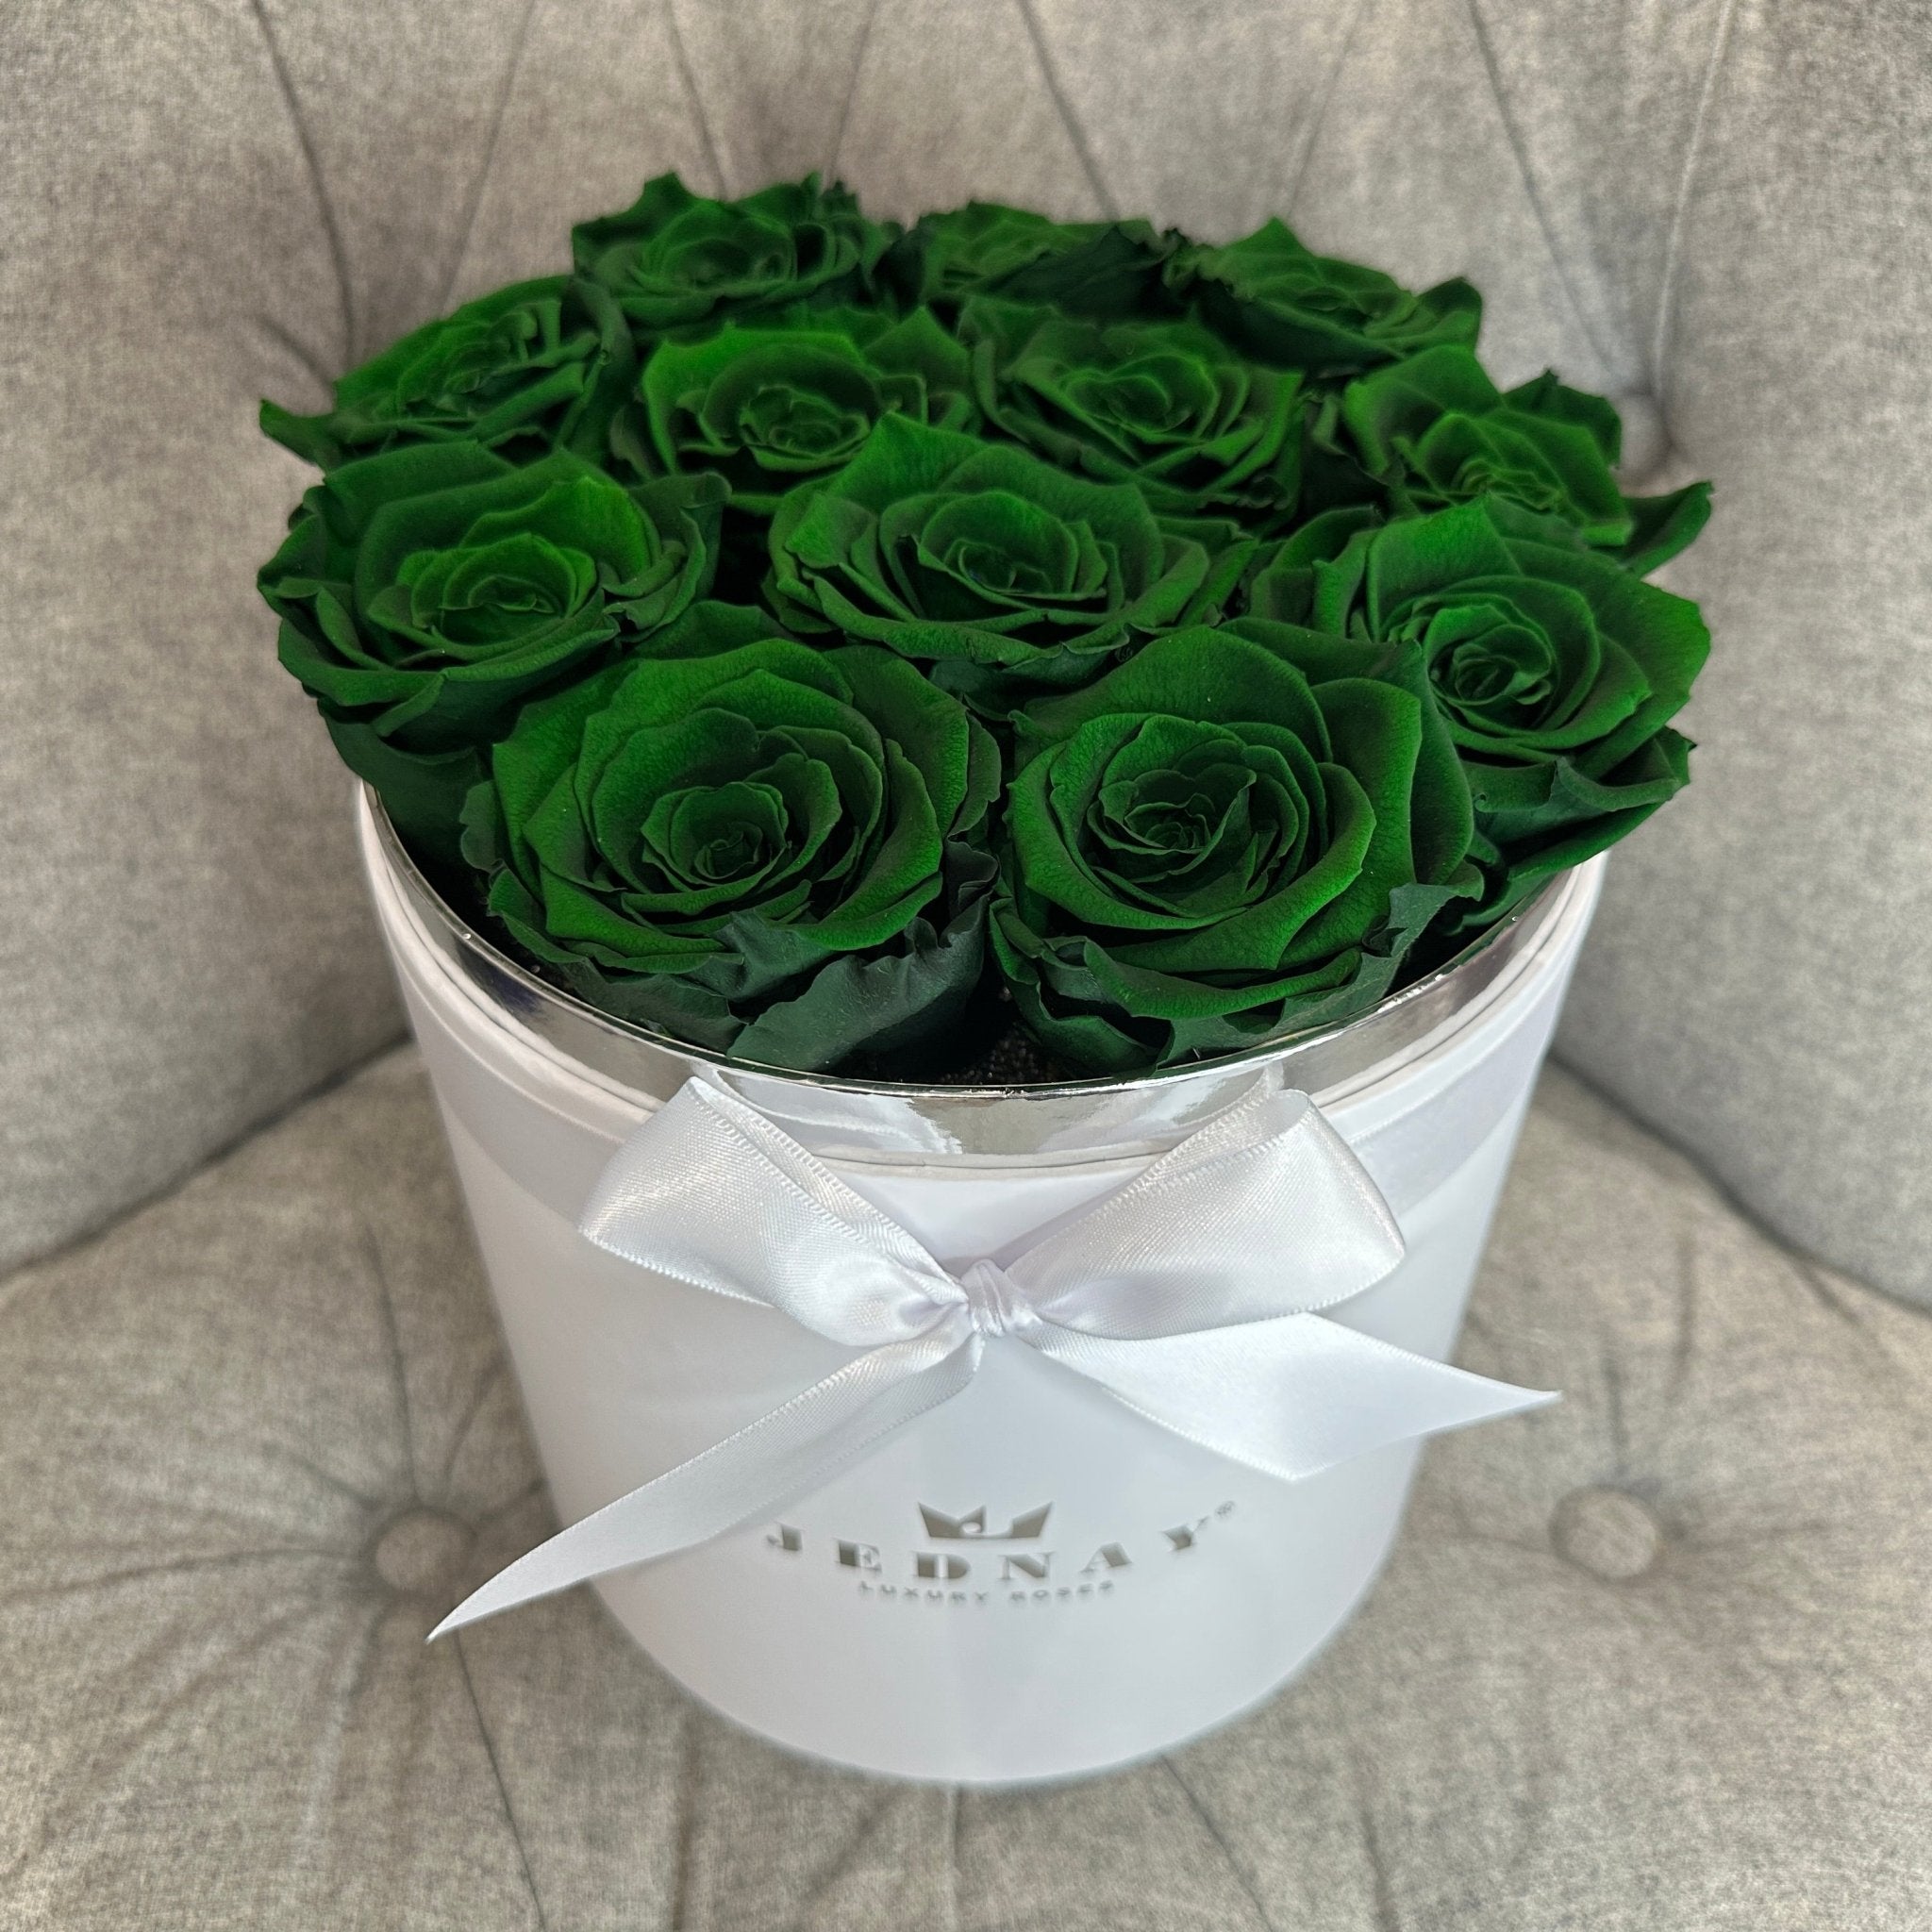 Large Classic White Forever Rose Box - Deep Forest Green Eternal Roses - Jednay Roses